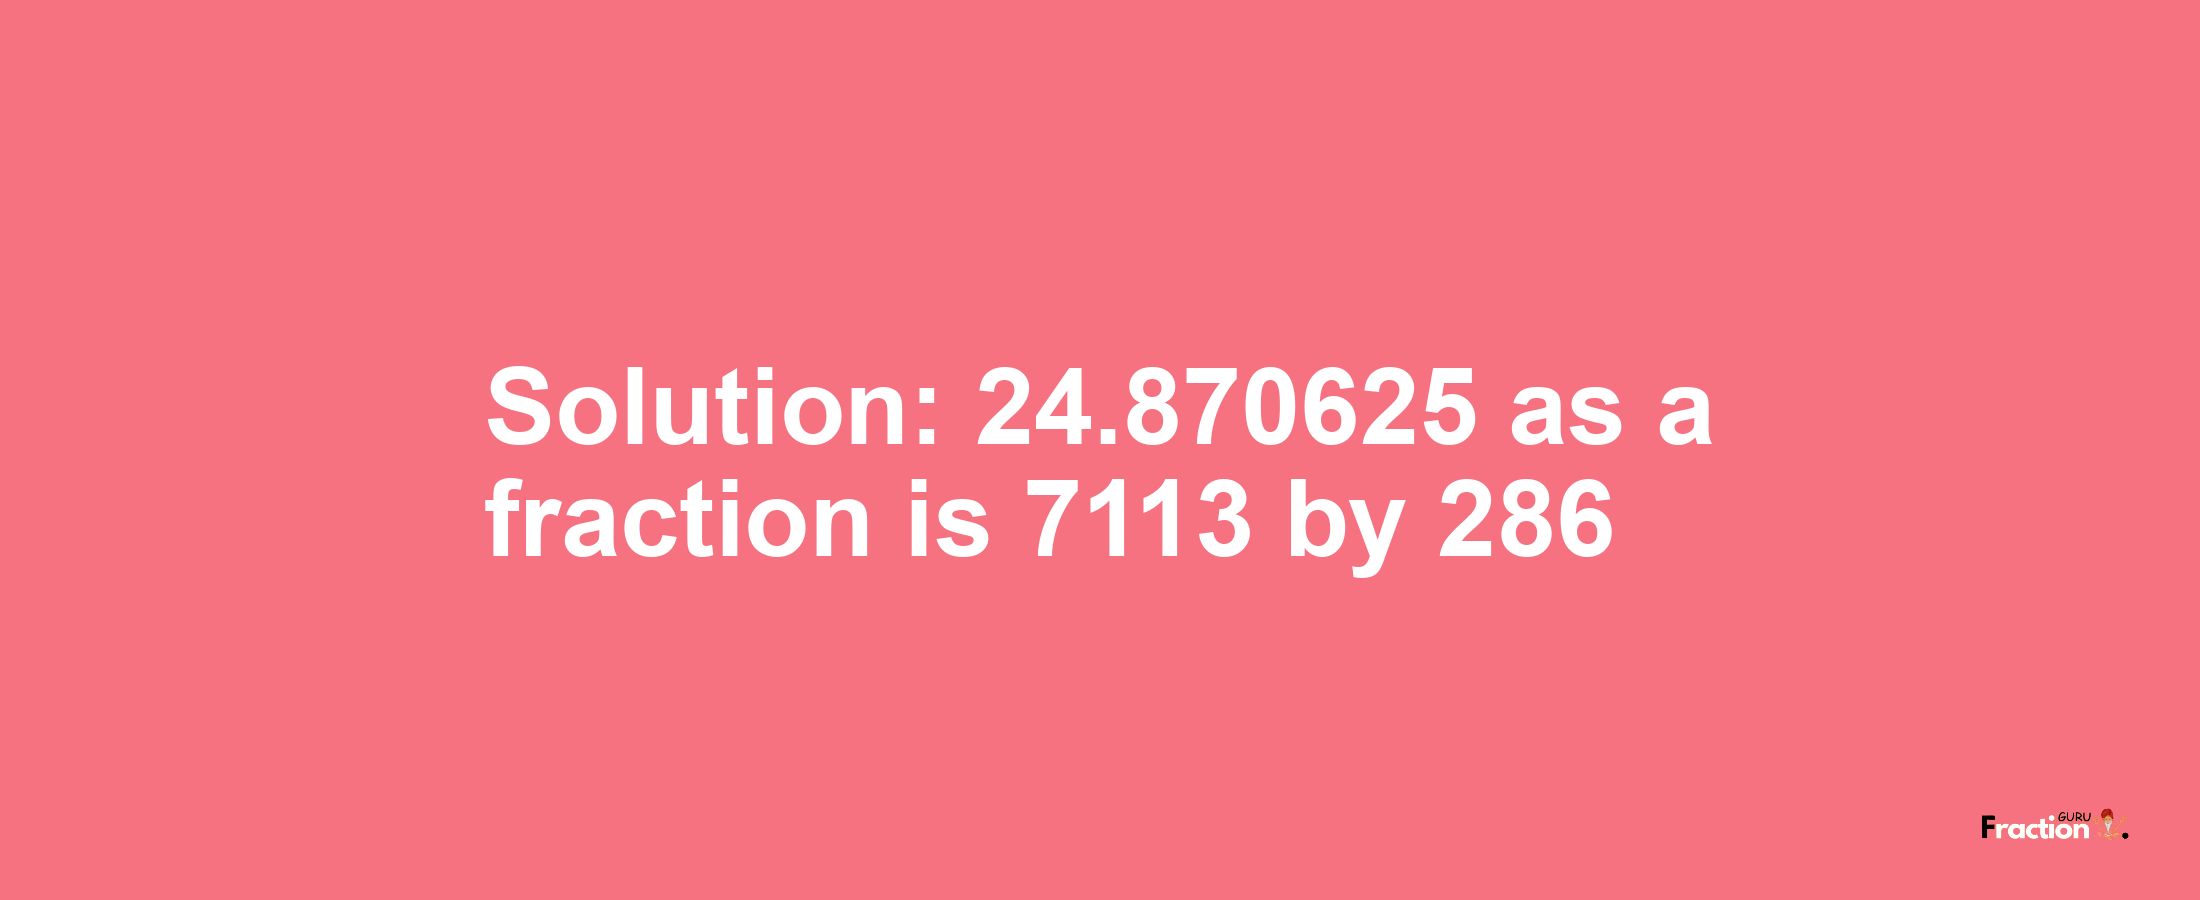 Solution:24.870625 as a fraction is 7113/286